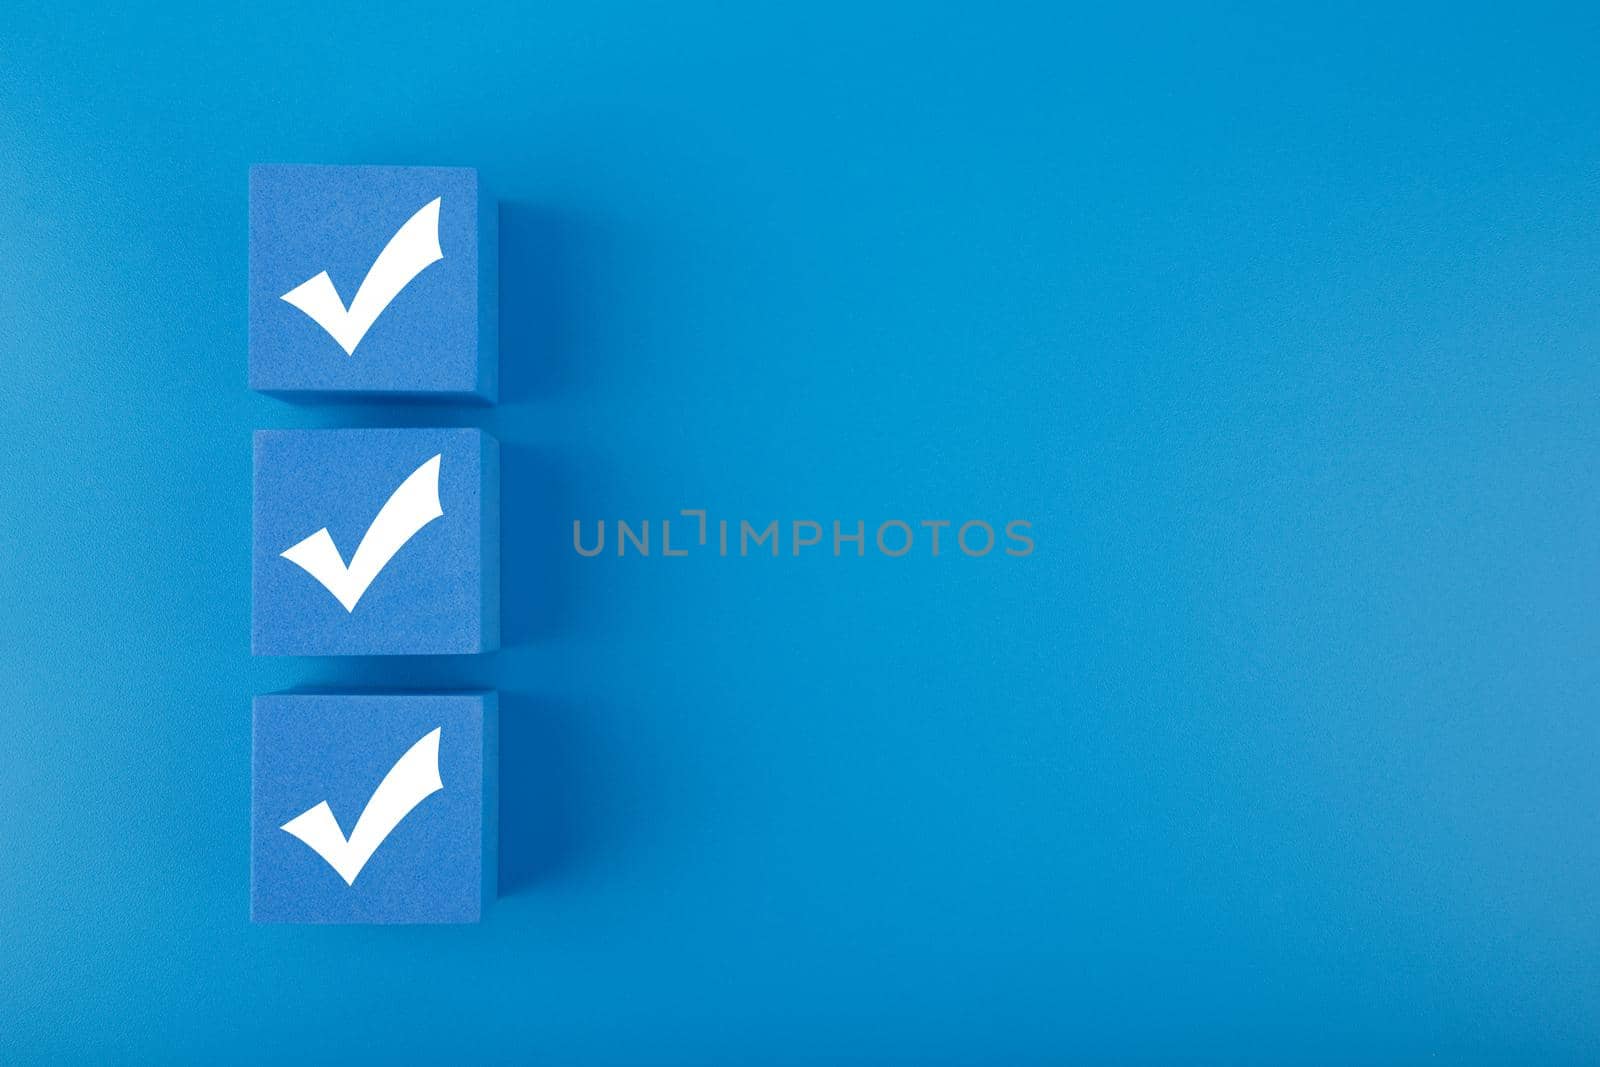 Three checkmarks on blue cubes against blue background with copy space by Senorina_Irina